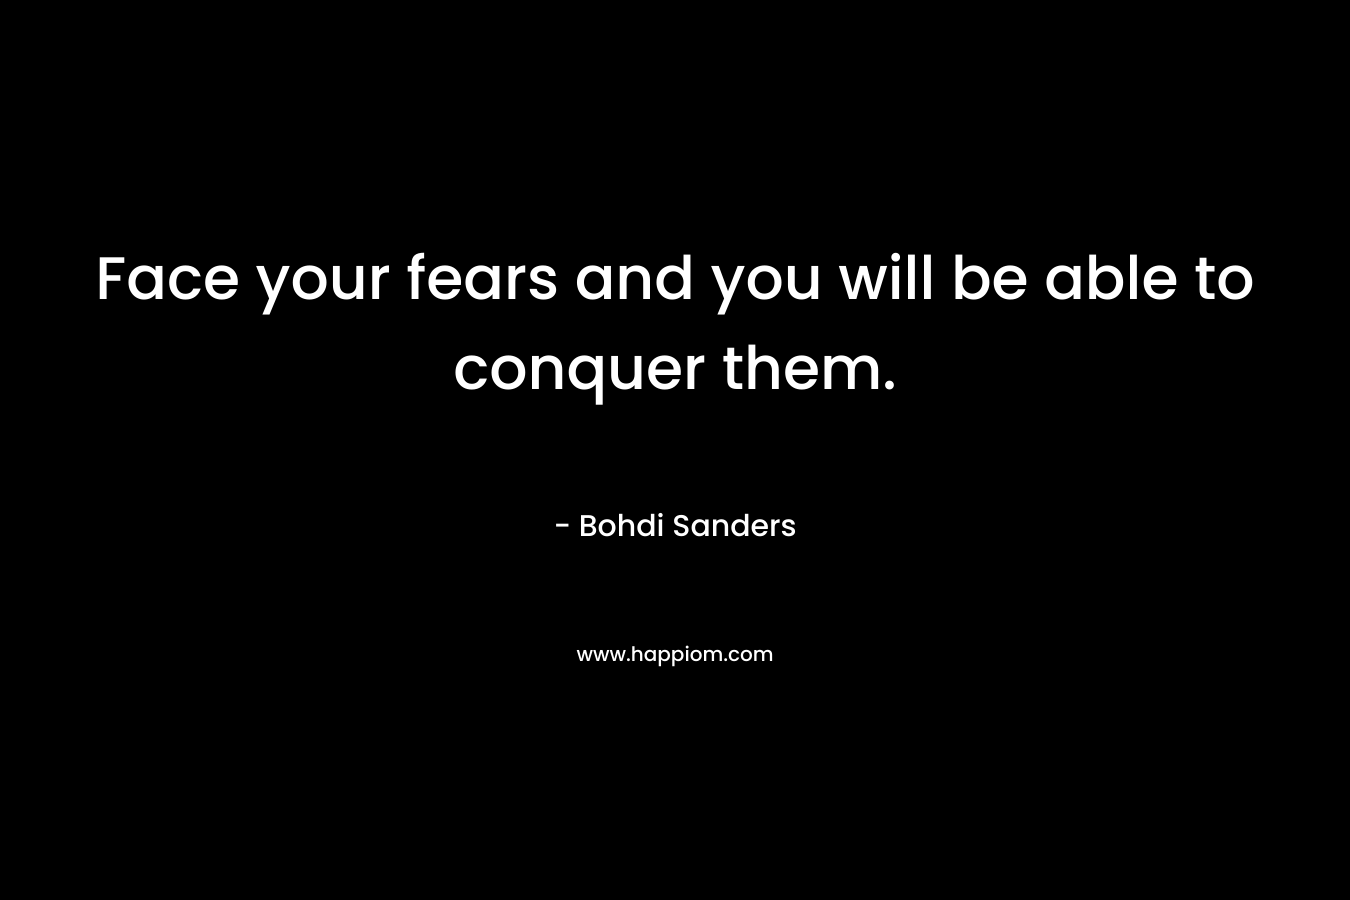 Face your fears and you will be able to conquer them.